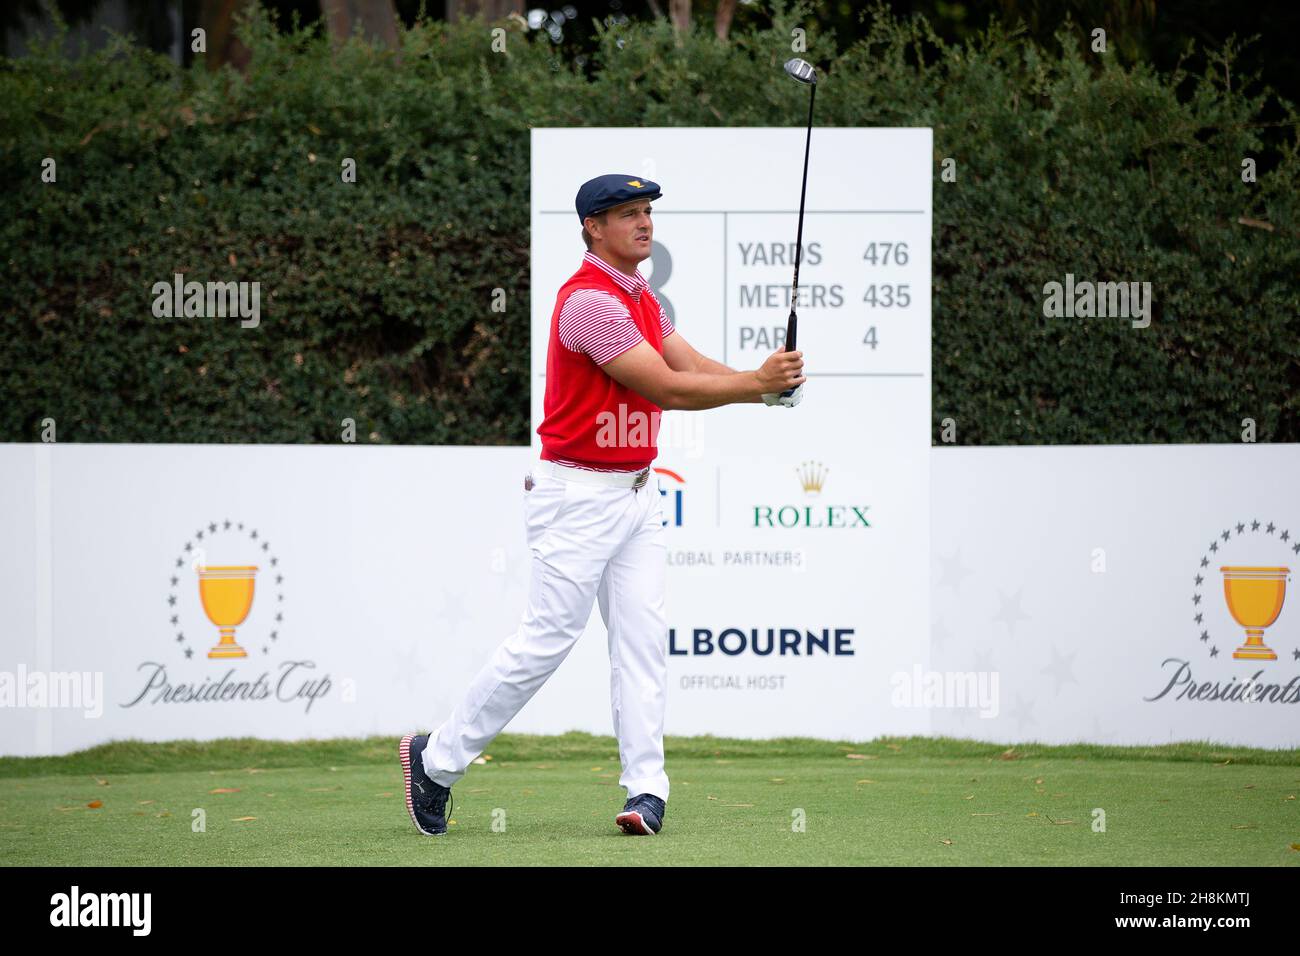 Bryson DeChambeau of team USA tees off from the 8th hole during round 1 of The Presidents Cup Credit: Speed Media/Alamy Live News Stock Photo